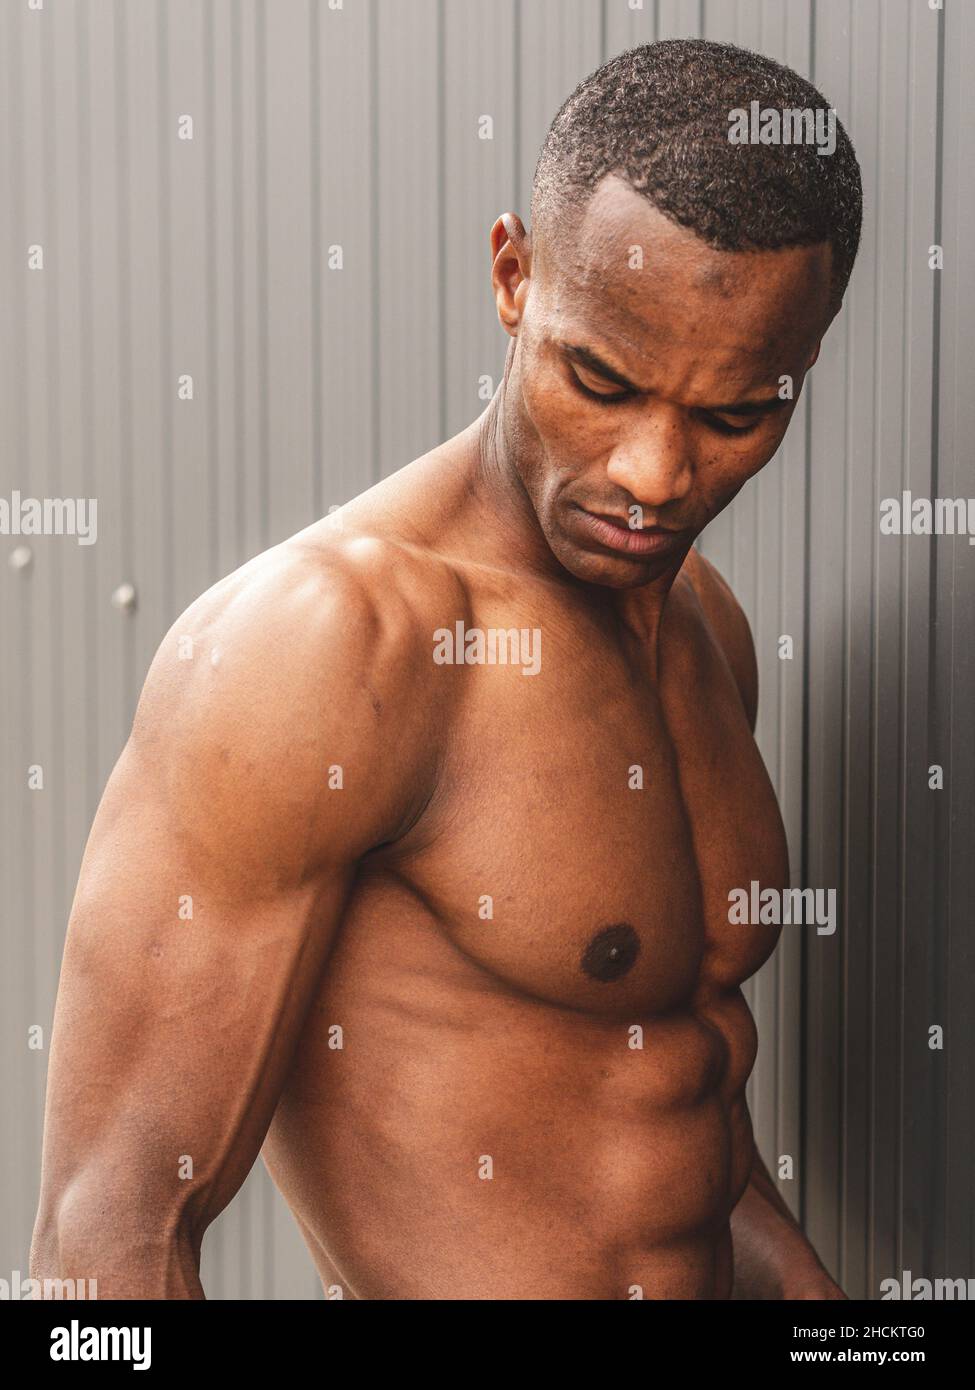 African-American fit man with six-pack abs Stock Photo - Alamy